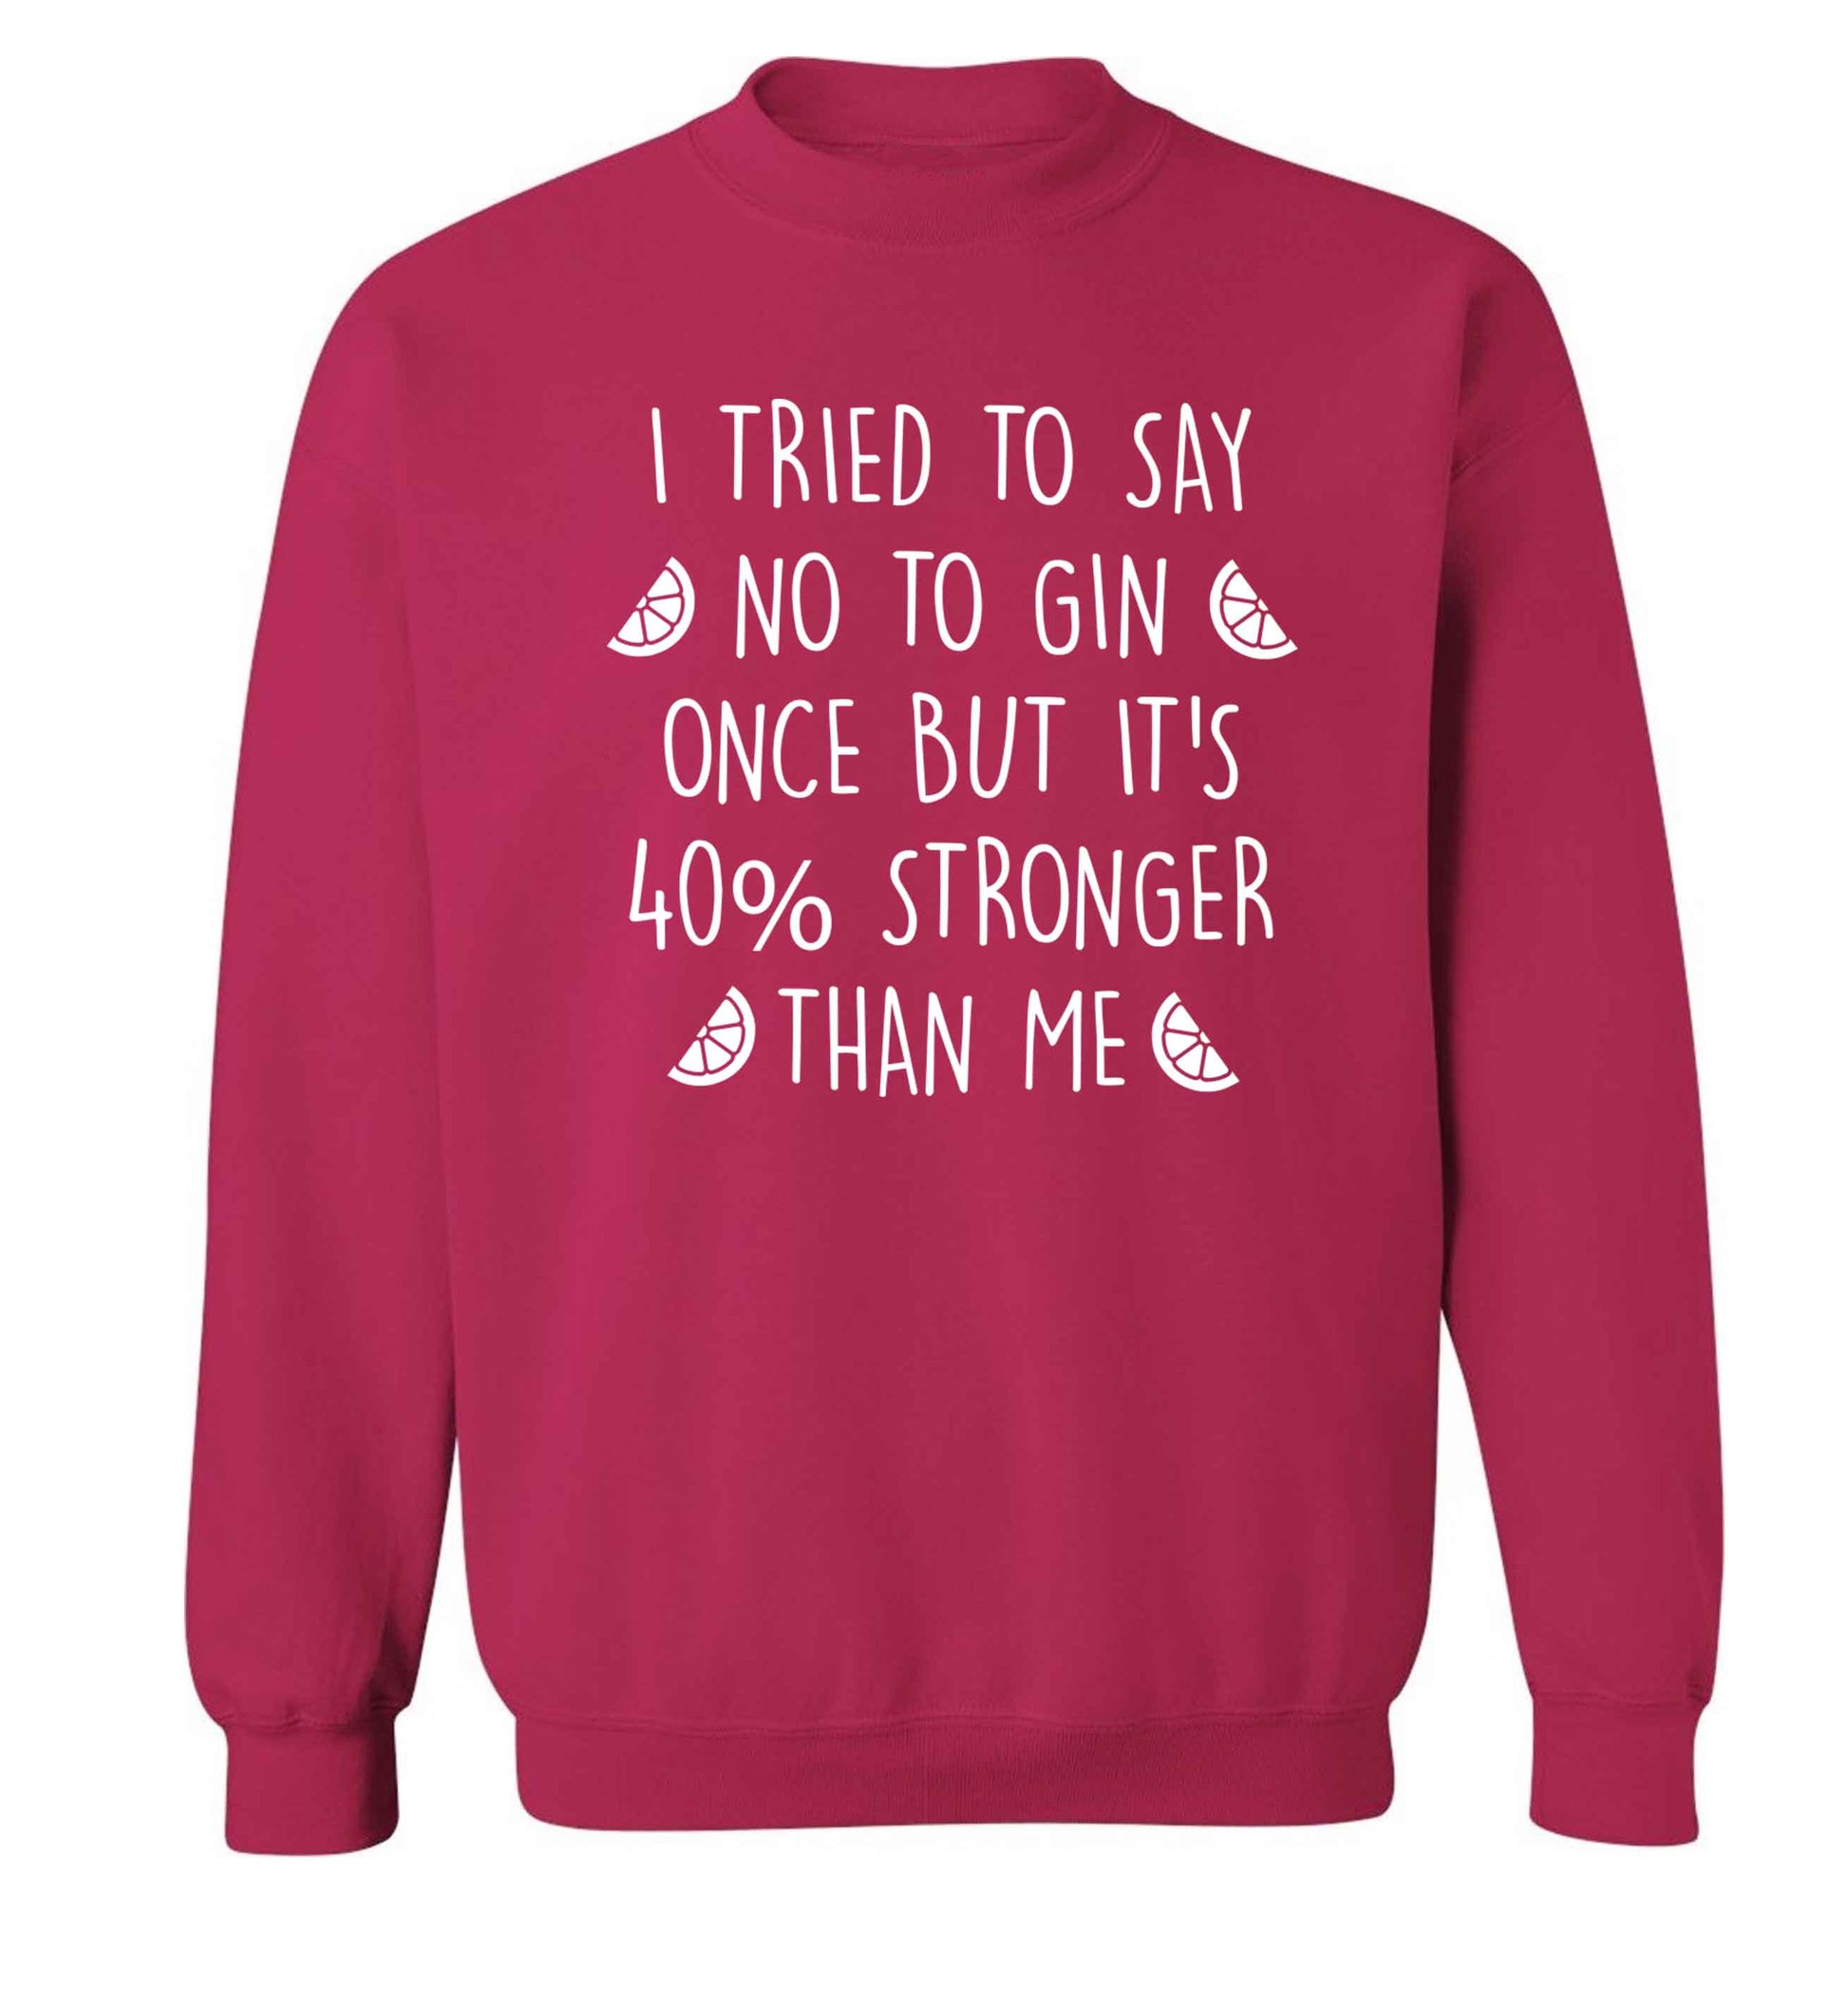 I tried to say no to gin once but it's 40% stronger than me Adult's unisex pink Sweater 2XL